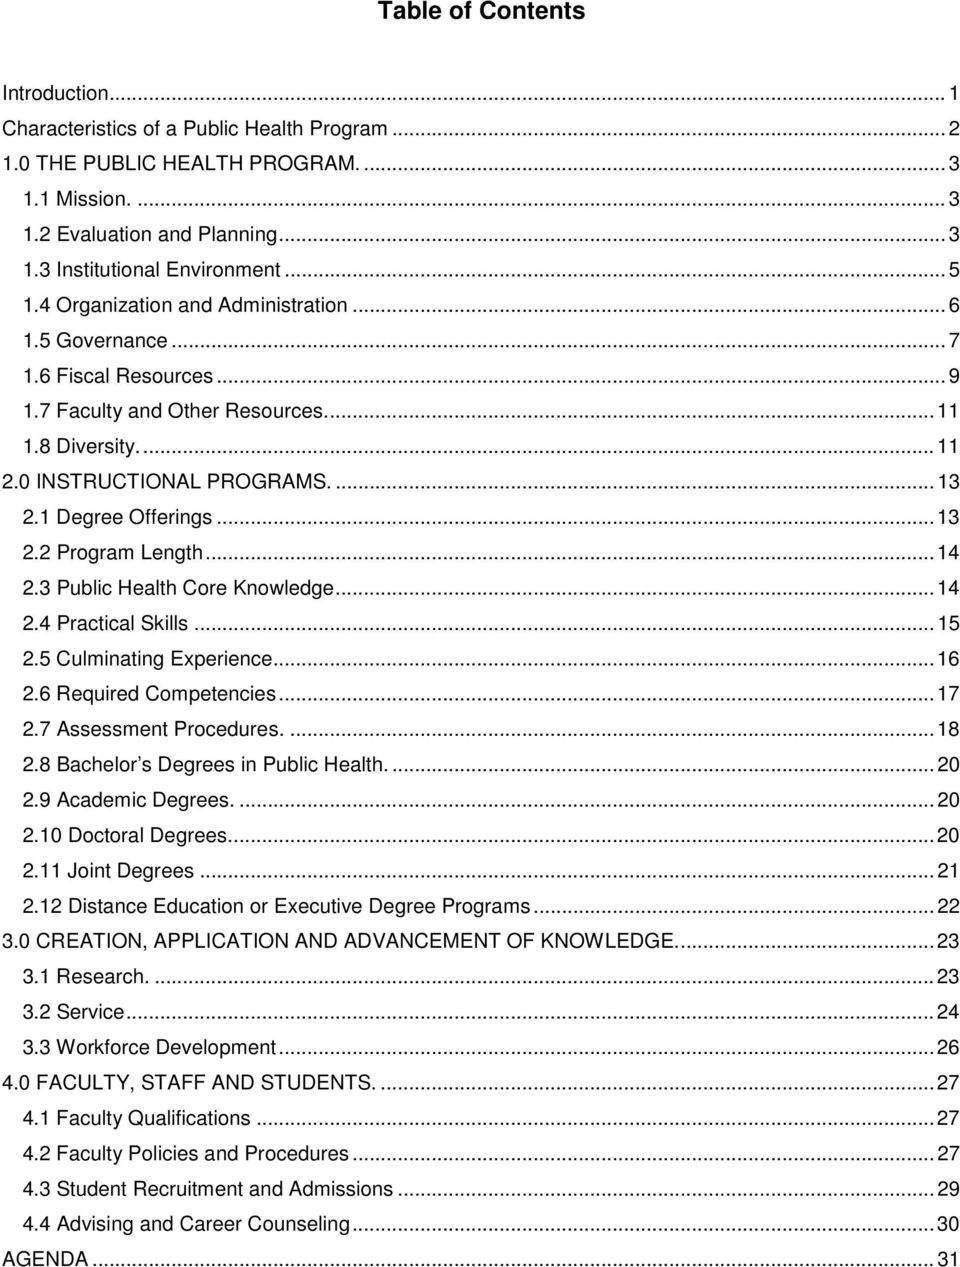 1 Degree Offerings... 13 2.2 Program Length... 14 2.3 Public Health Core Knowledge... 14 2.4 Practical Skills... 15 2.5 Culminating Experience... 16 2.6 Required Competencies... 17 2.